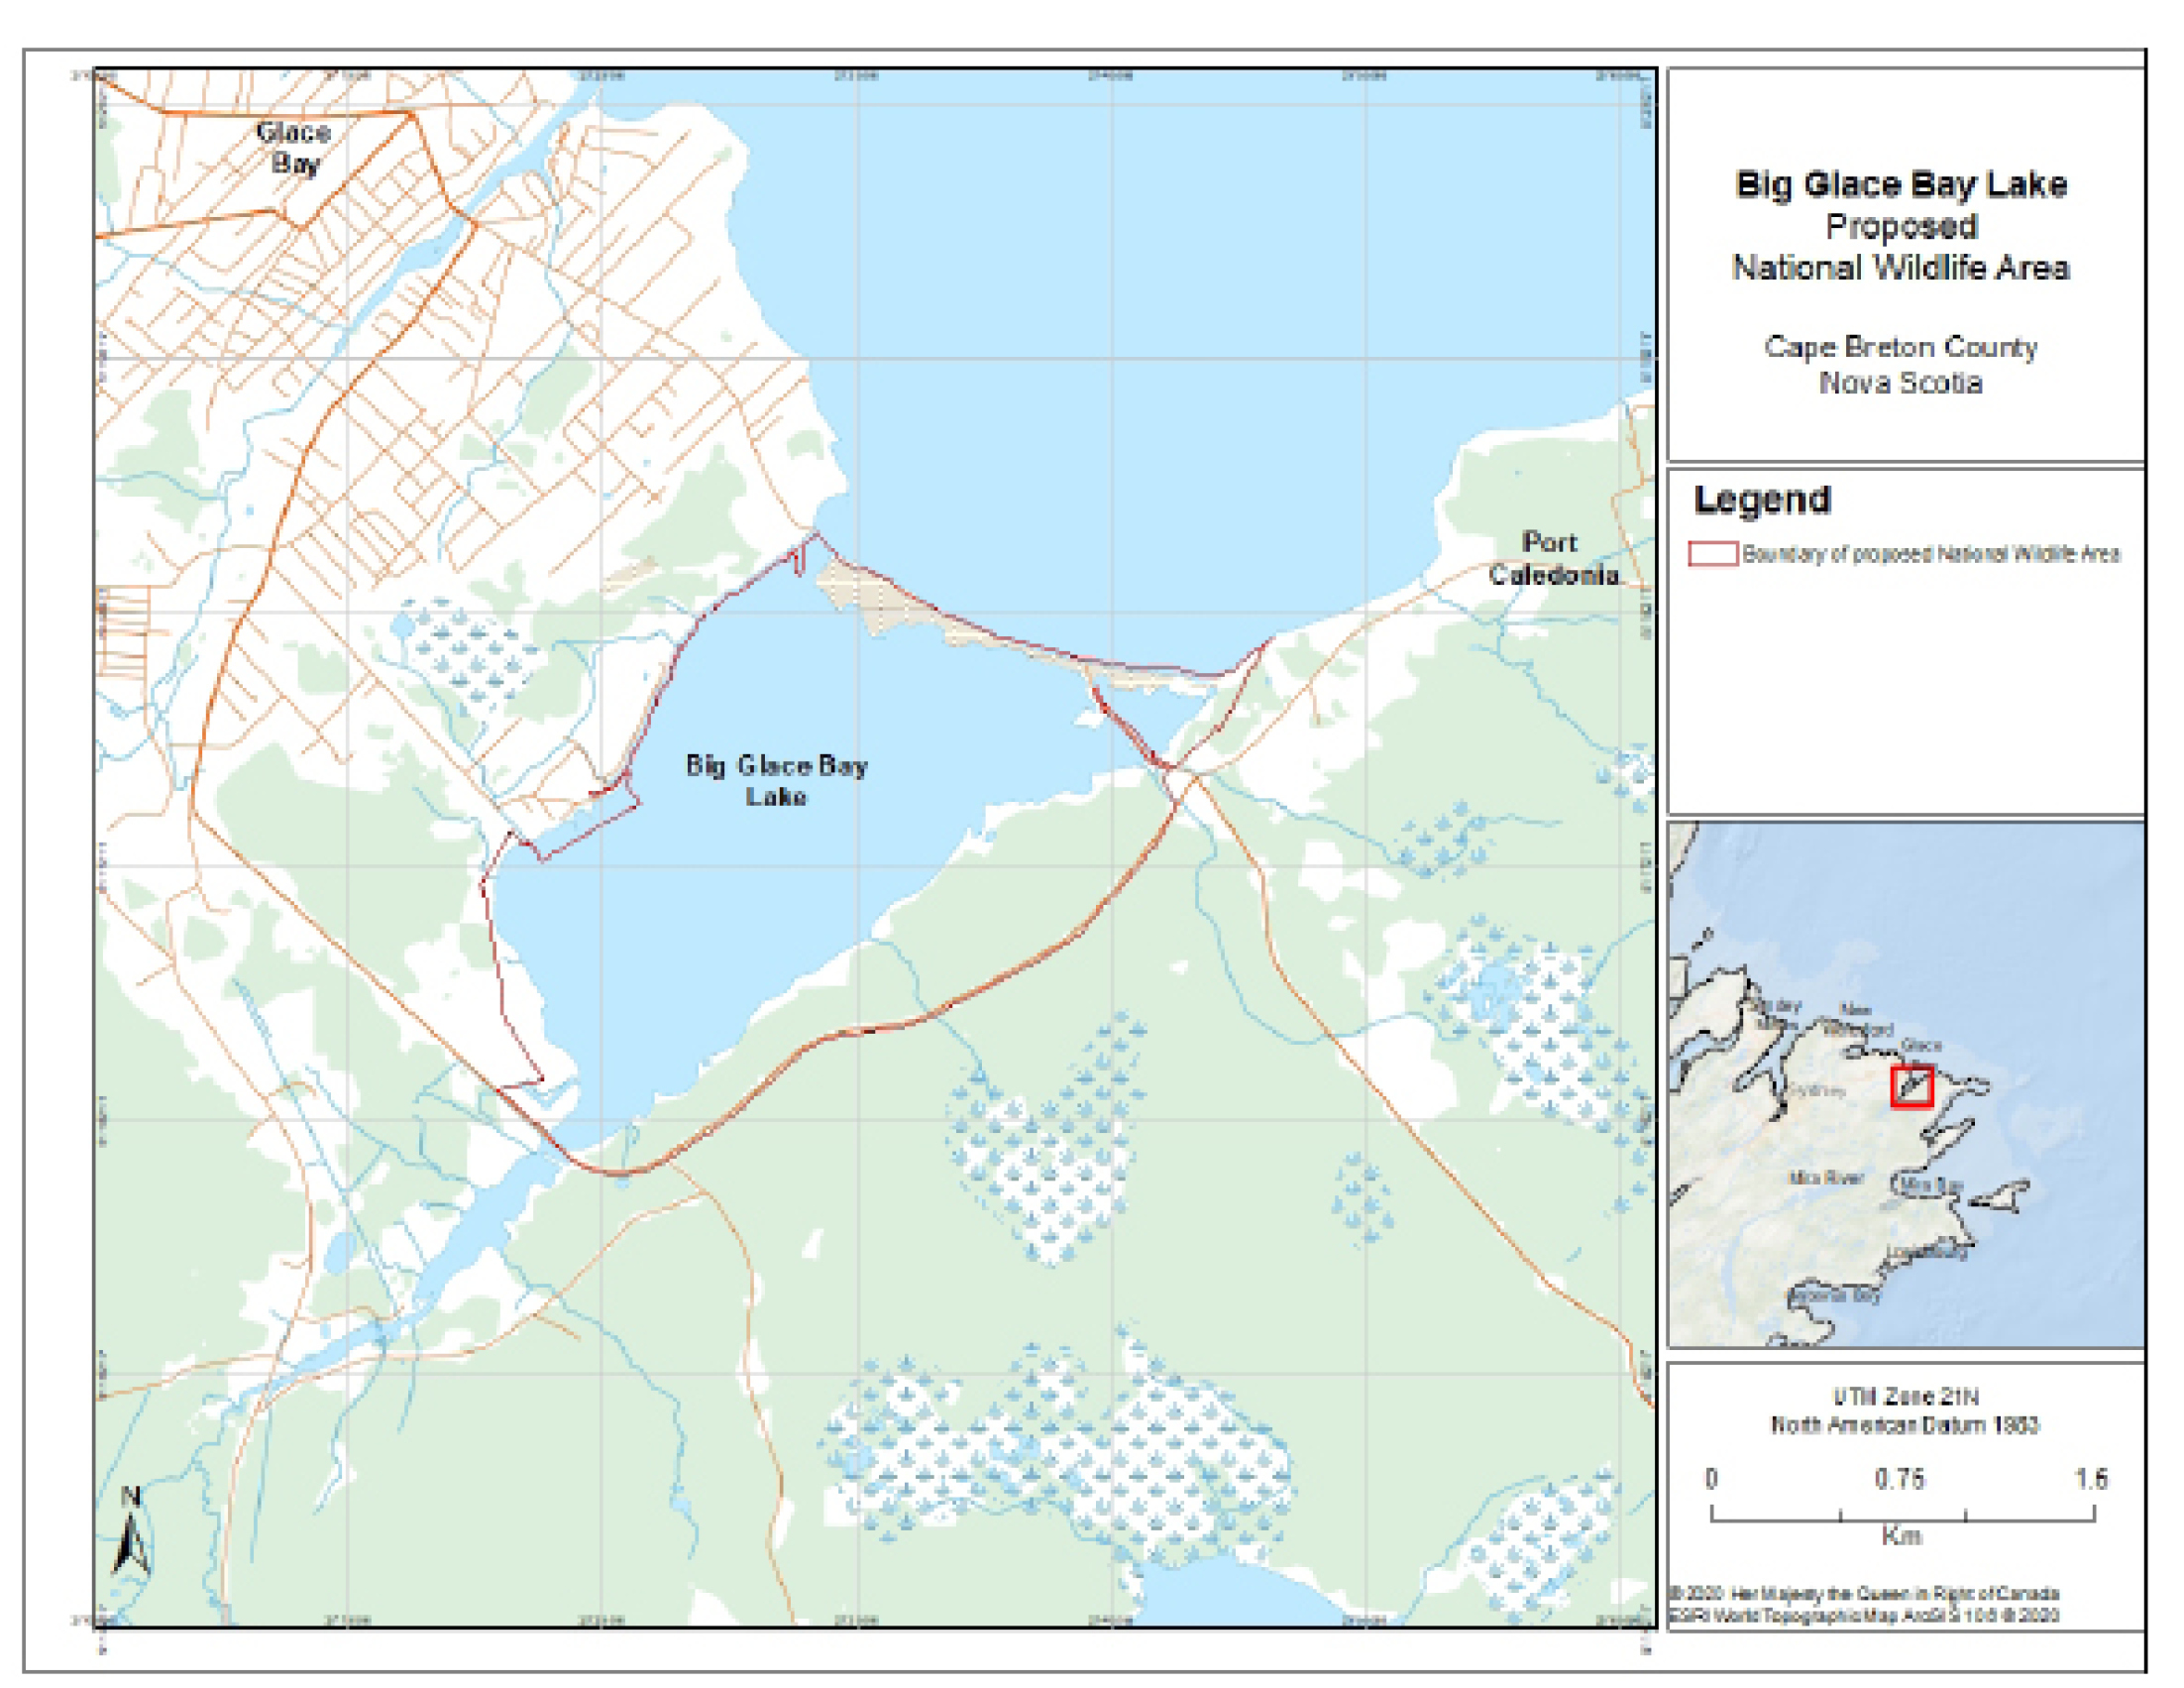 Figure 1. Map of the Big Glace Bay Lake National Wildlife Area